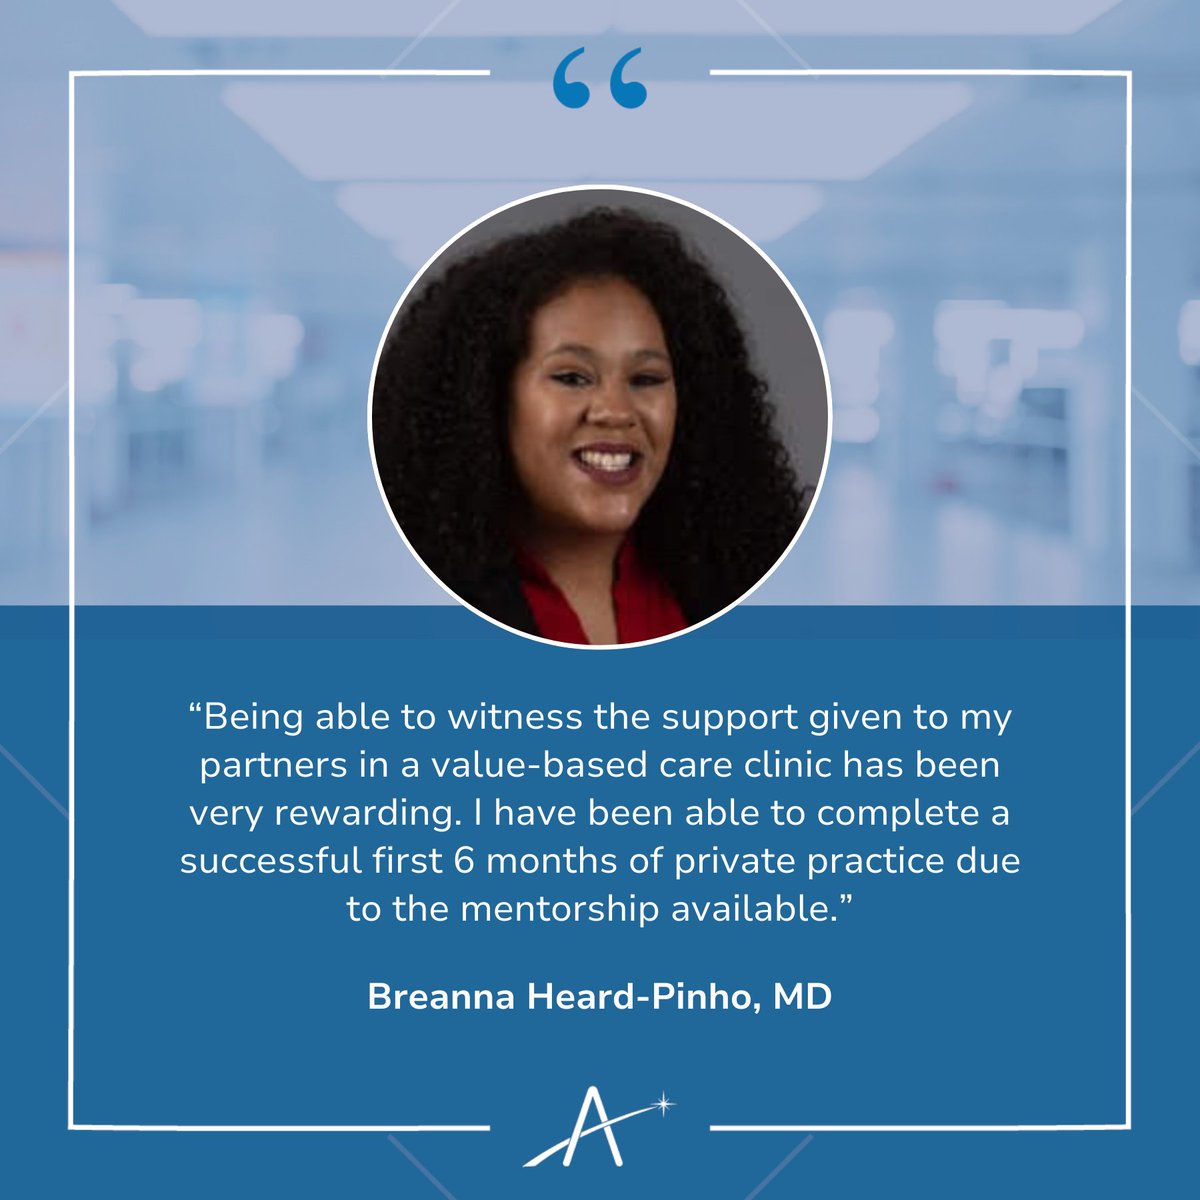 Our FIRST Program residents, like Dr. Breanna Heard-Pinho, are excelling at making their own paths in the value-based care world. Curious to see how you can join them? Submit your interest form today: bit.ly/3Tvqr1j